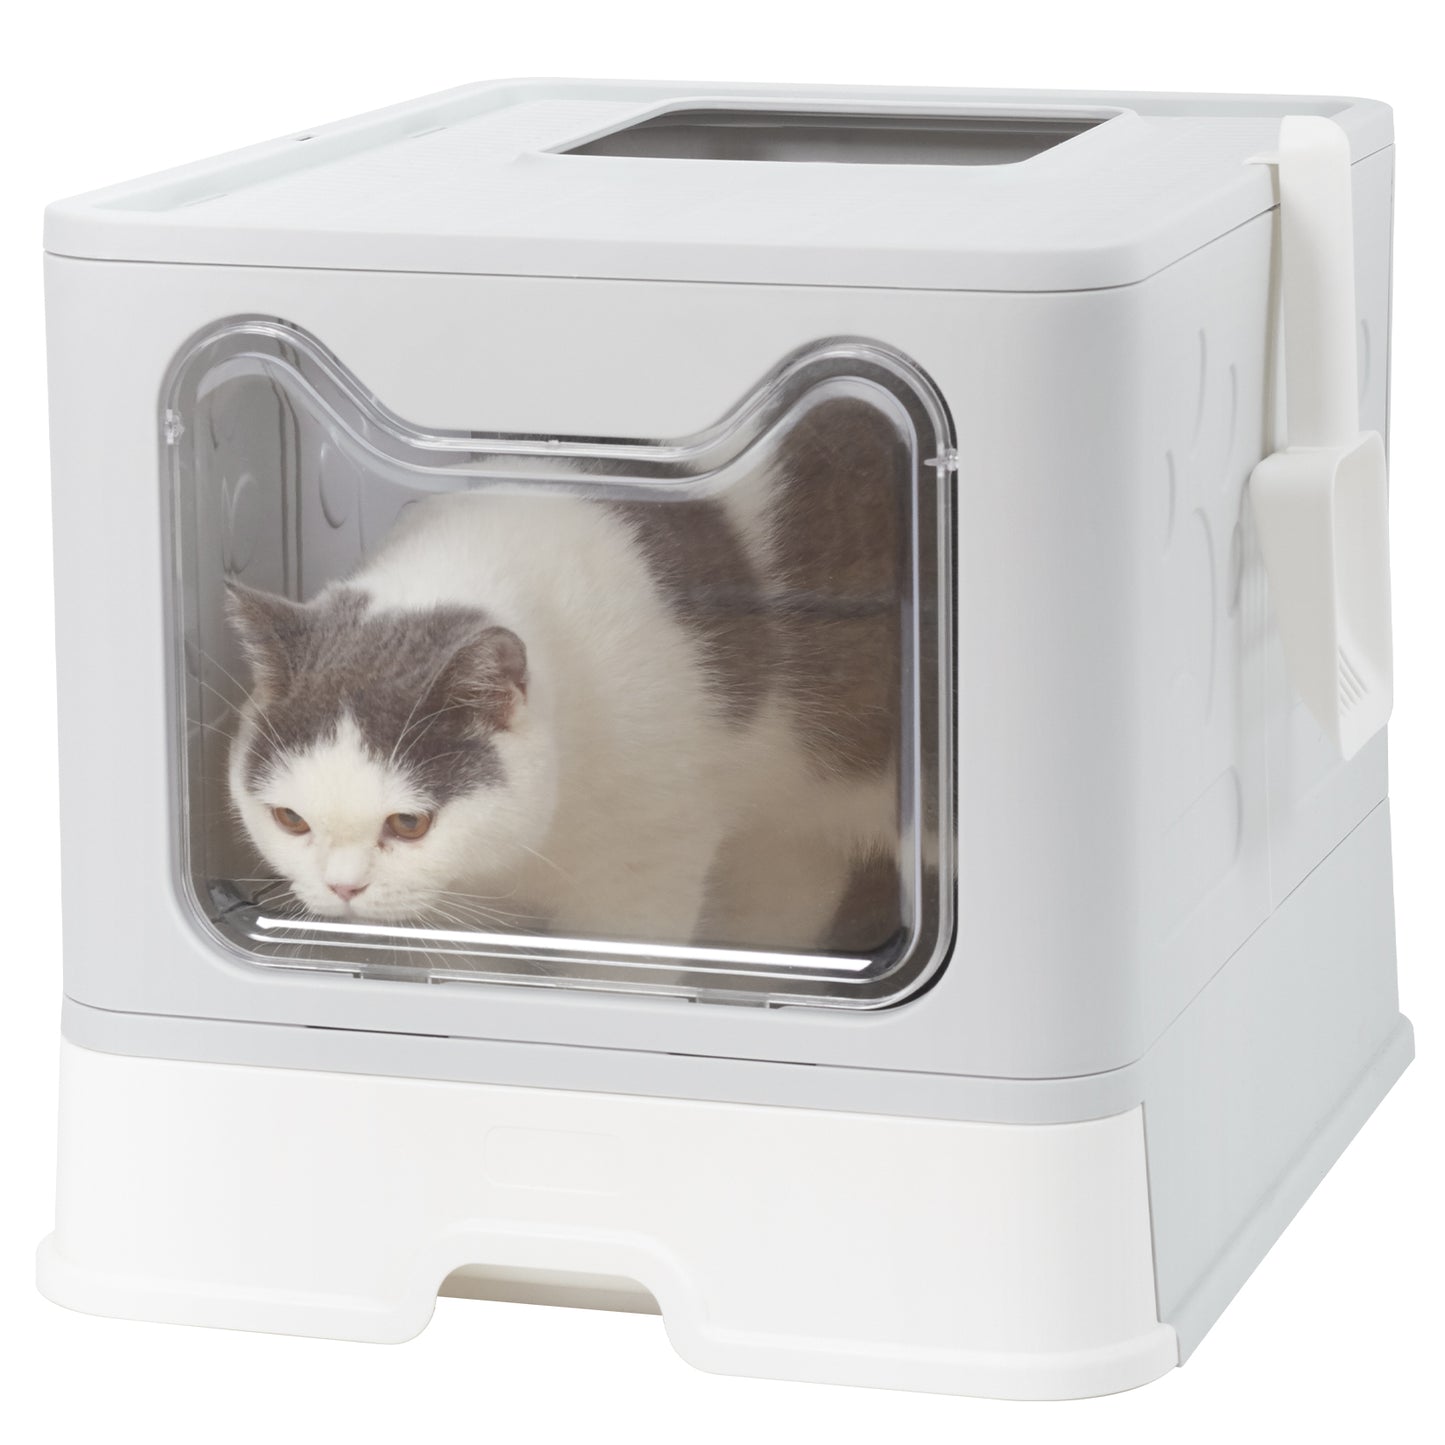 Large Enclosed Cat Litter Box with Scoop Drawer Portable Foldable Litter Boxes Furniture for Cats Indoors Kittens